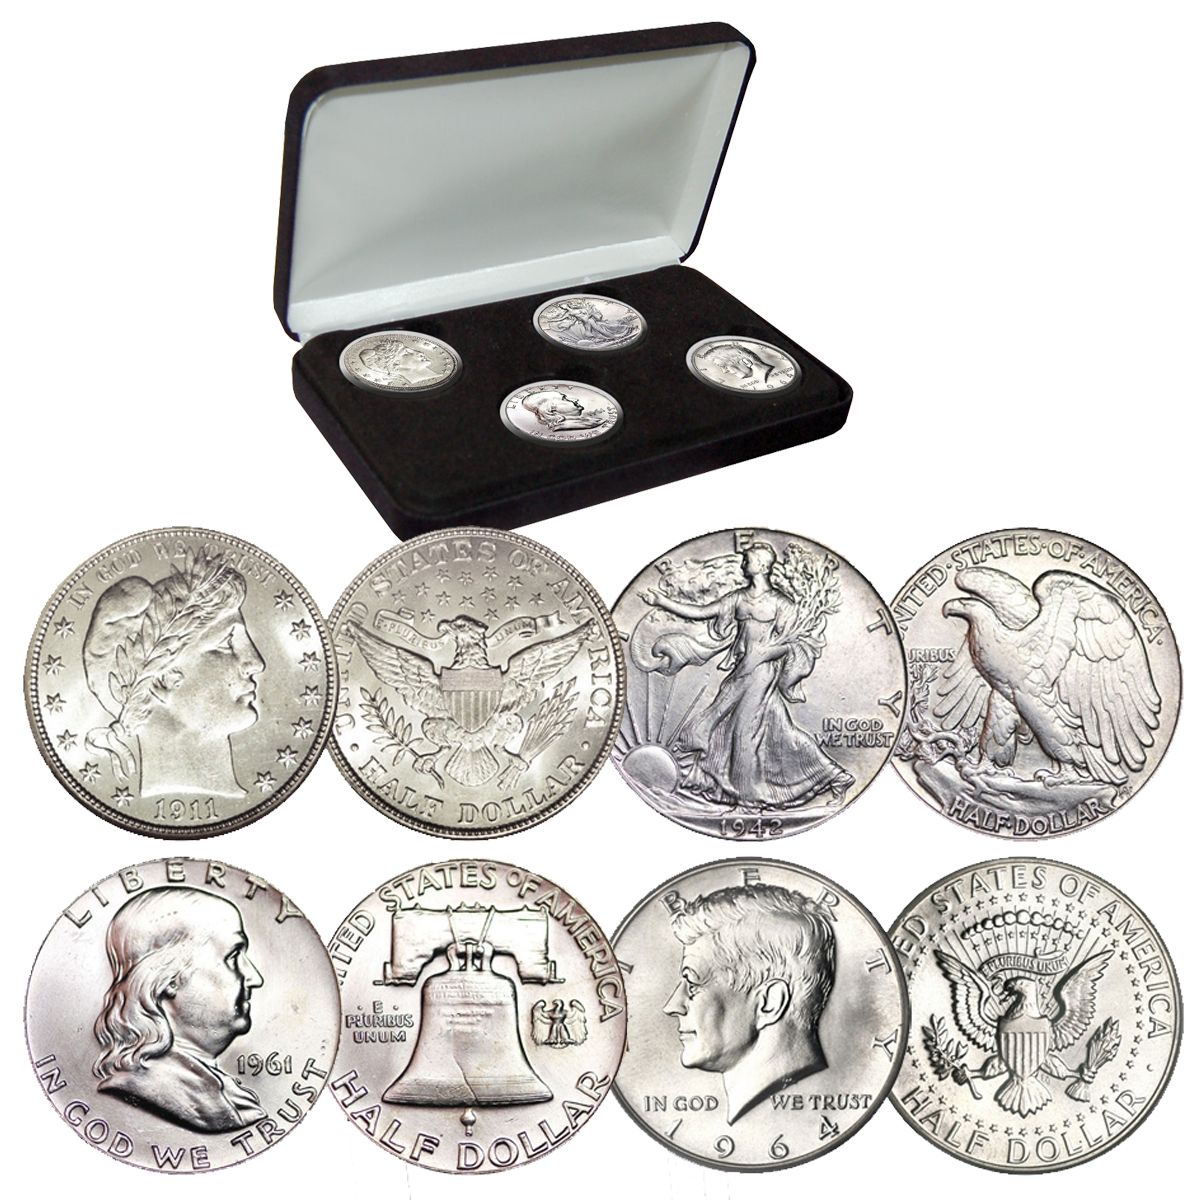 20th Century Silver Half Dollar Collection - The Patriotic Mint